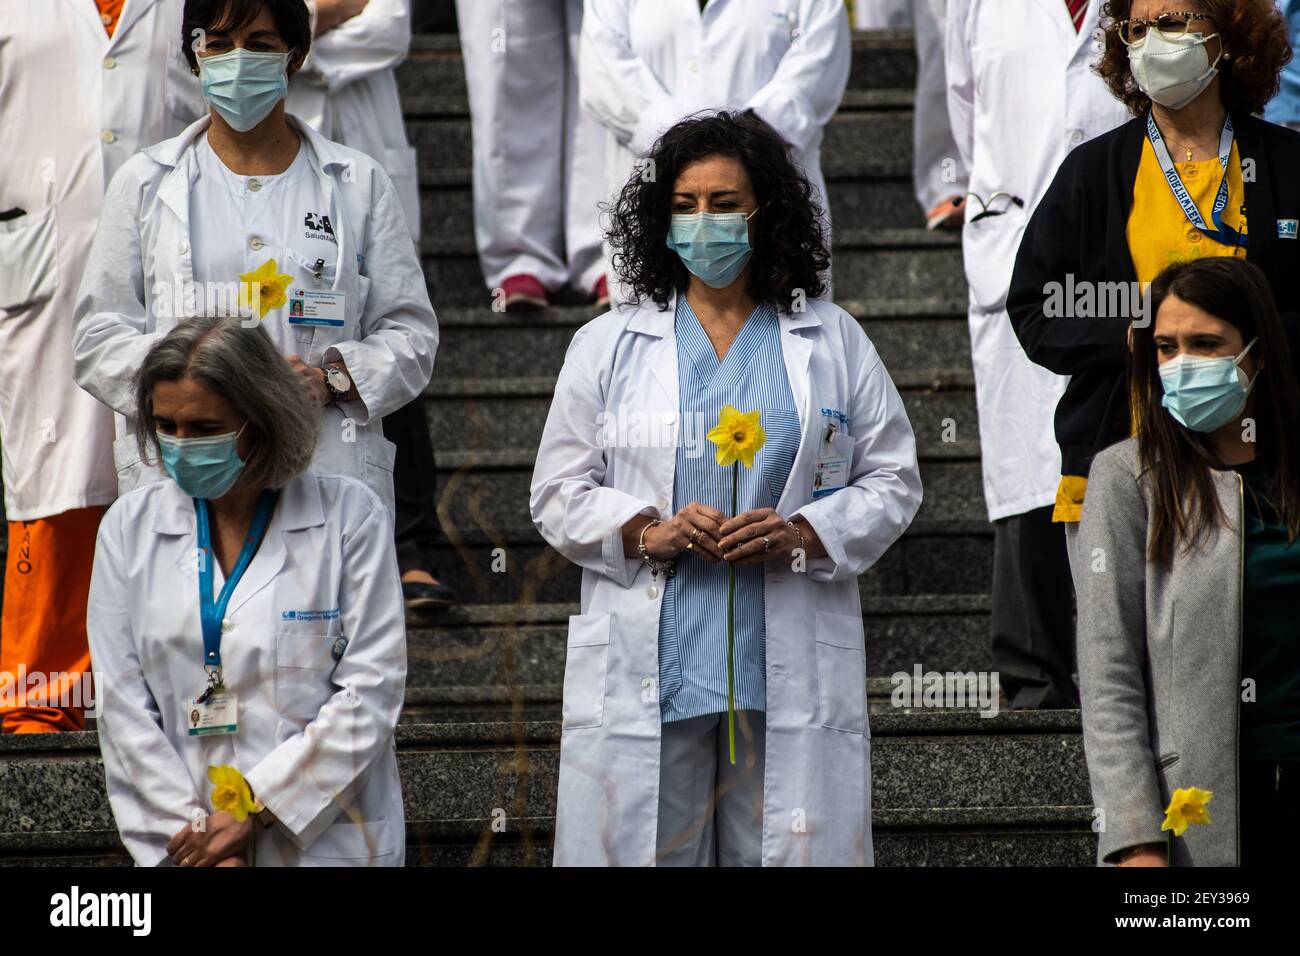 Madrid, Spain. 05th Mar, 2021. Health workers of Gregorio Marañon Hospital carrying flowers pay tribute to coronavirus (COVID-19) victims. Approximately one year after the start of the pandemic in Spain, workers of the hospital pay a tribute to the victims of this disease at the front of the main entrance bringing 850 daffodils and 860 carnations. The Gregorio Marañon Hospital is one of the hospitals that has treated the most coronavirus patients, to date 16,116 patients, 957 have died. Credit: Marcos del Mazo/Alamy Live News Stock Photo